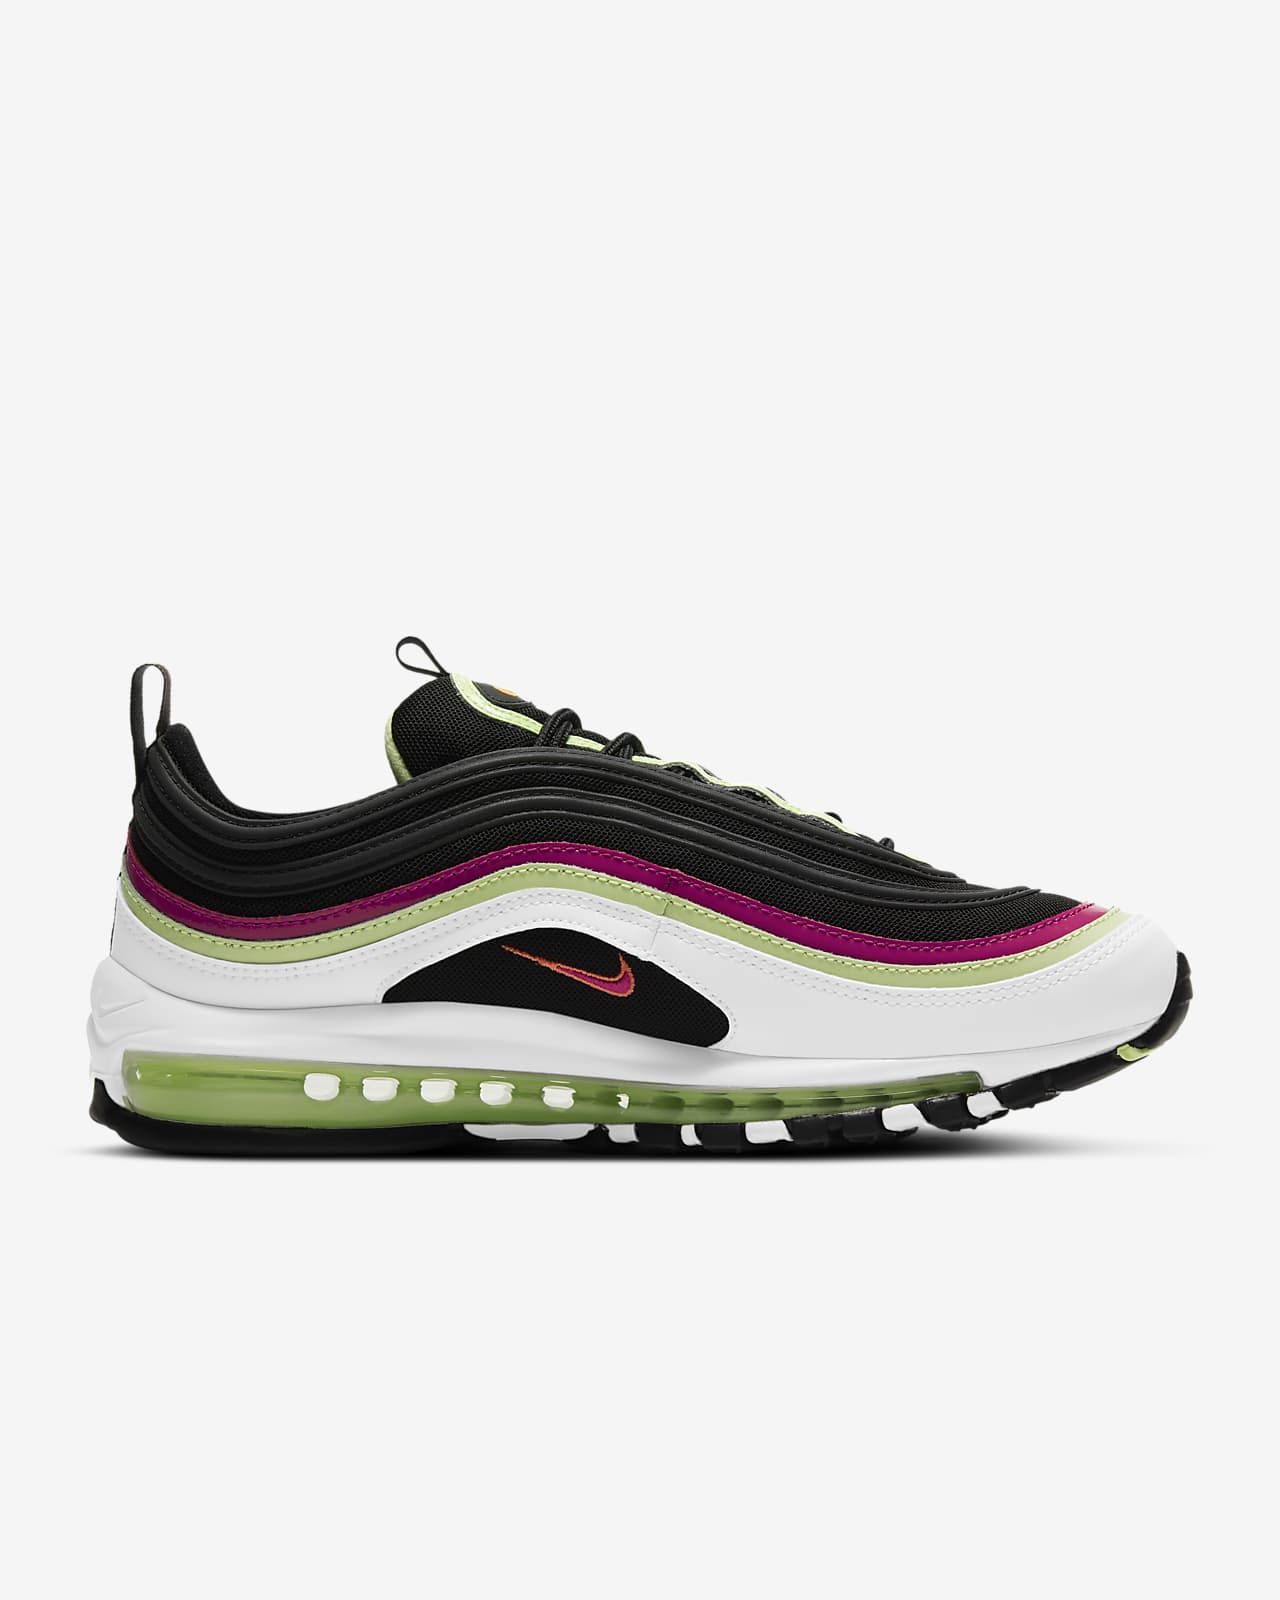 nike air max 97s black and white